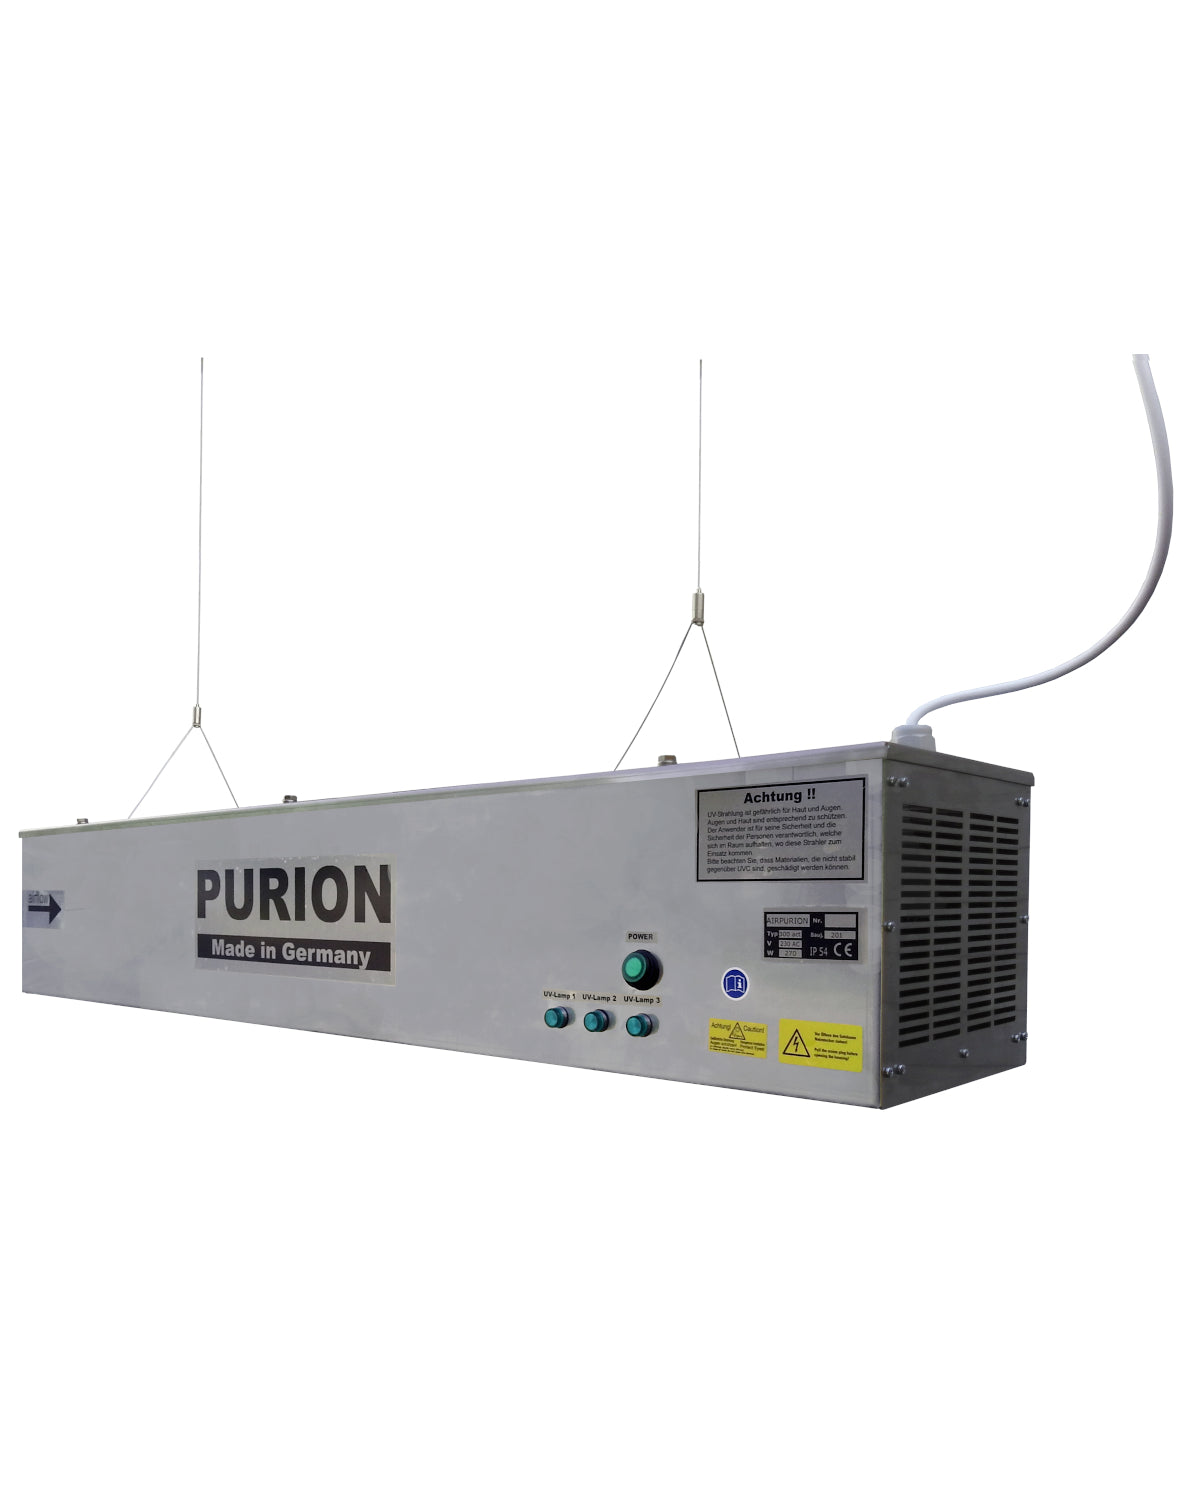 AIRPURION 300 active silent Plus